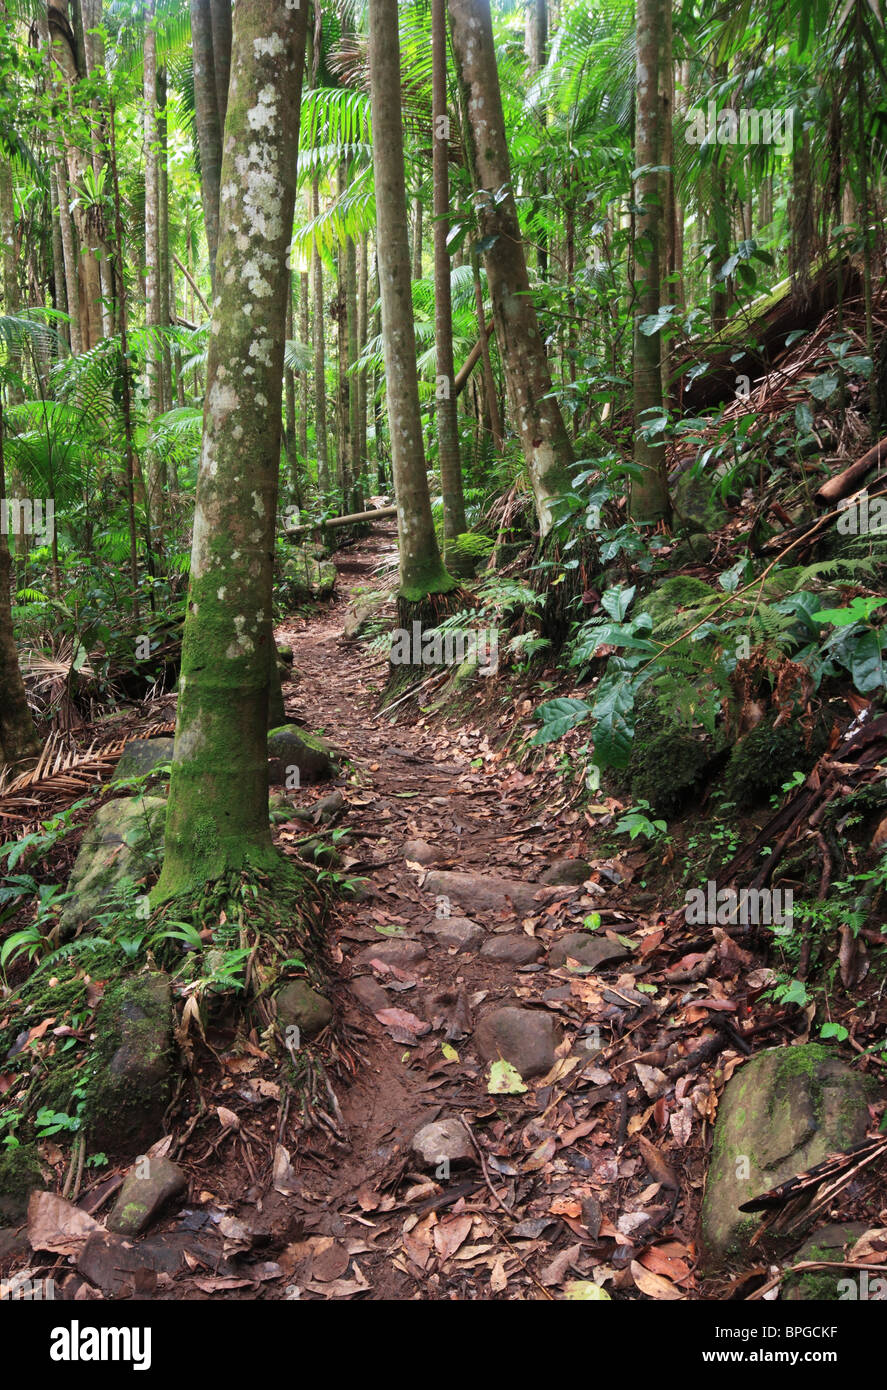 A walking track winds through Bangalow Palms and subtropical rainforest, northern NSW, Australia. Stock Photo